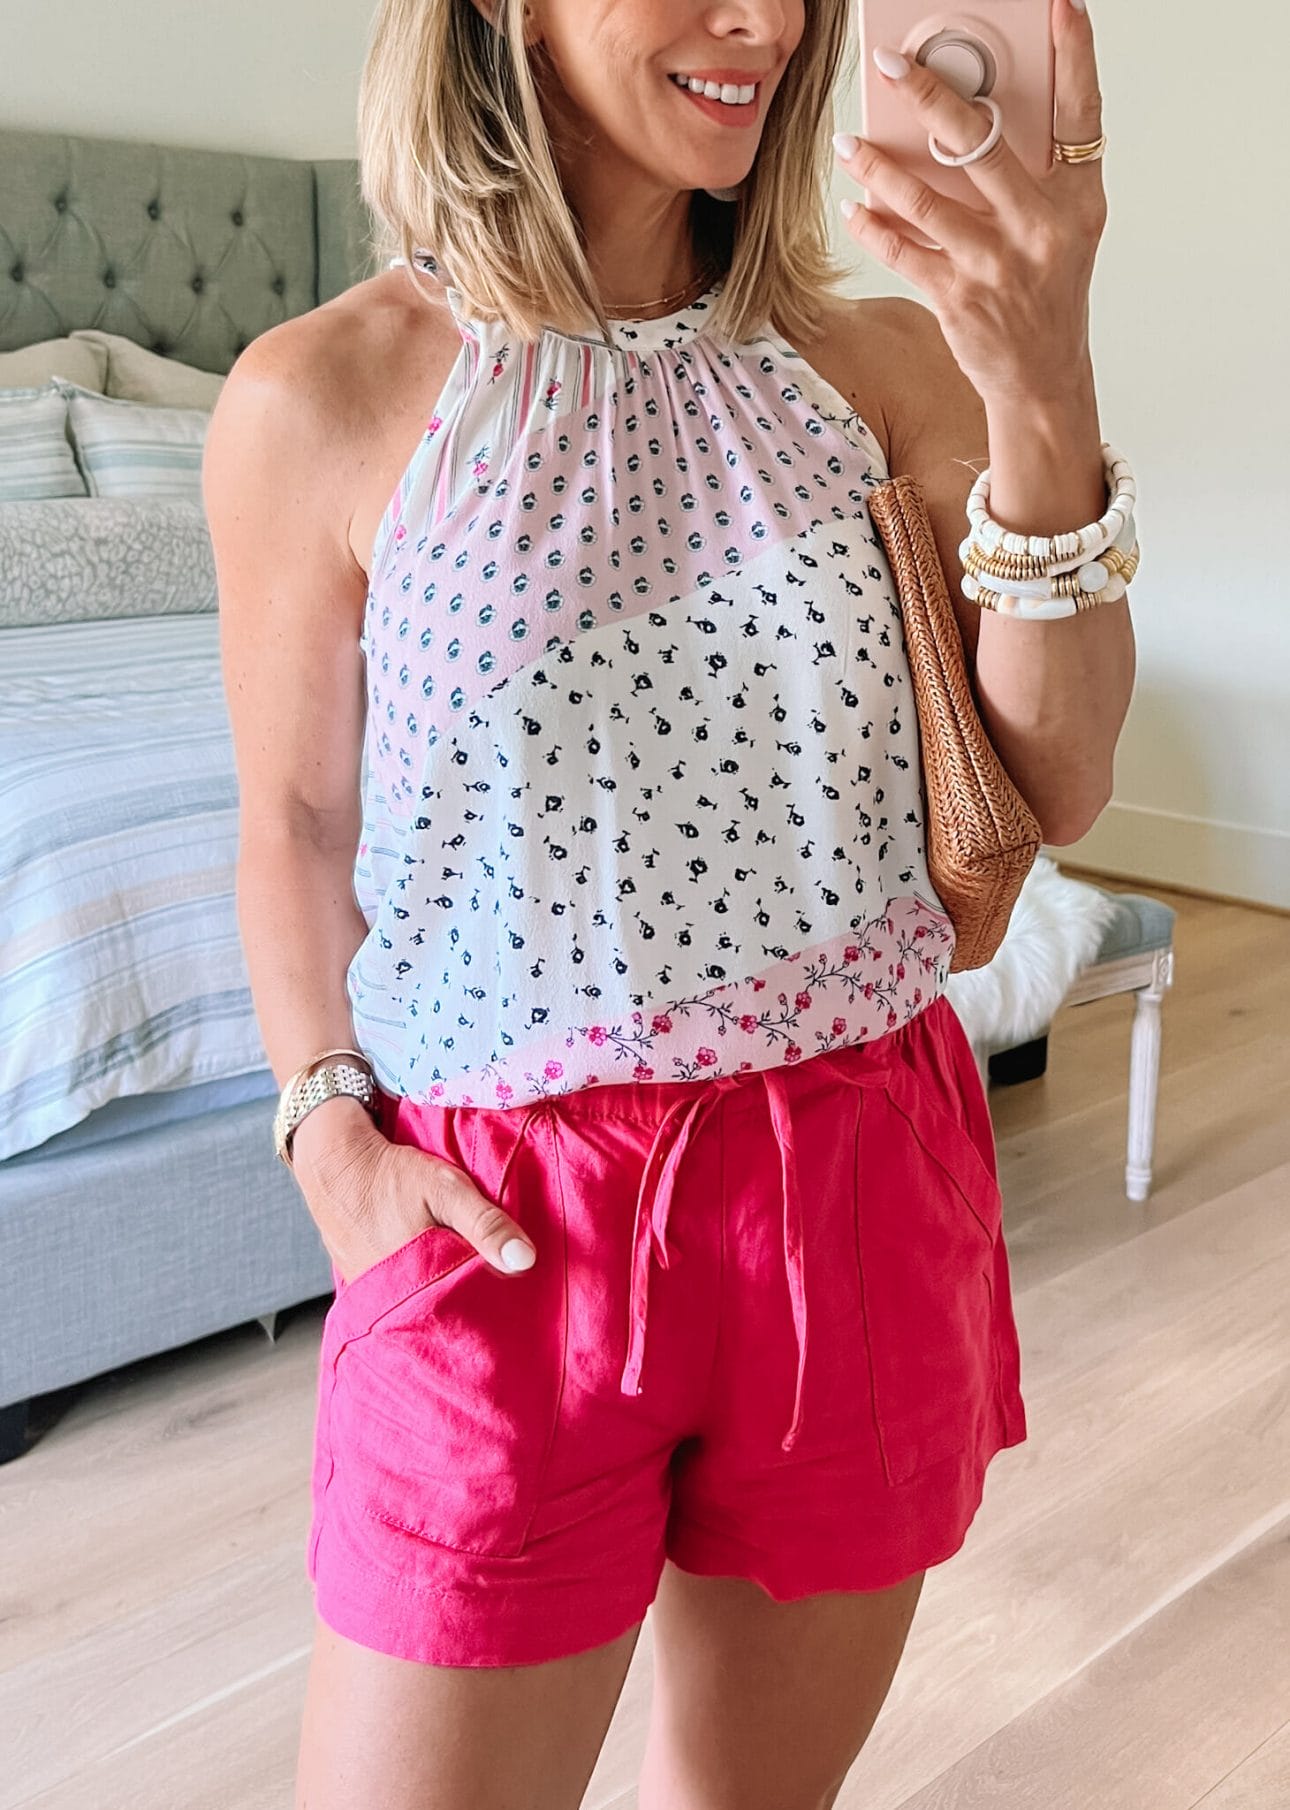 Patchwork Top, Pink Shorts, Wedges, Clutch